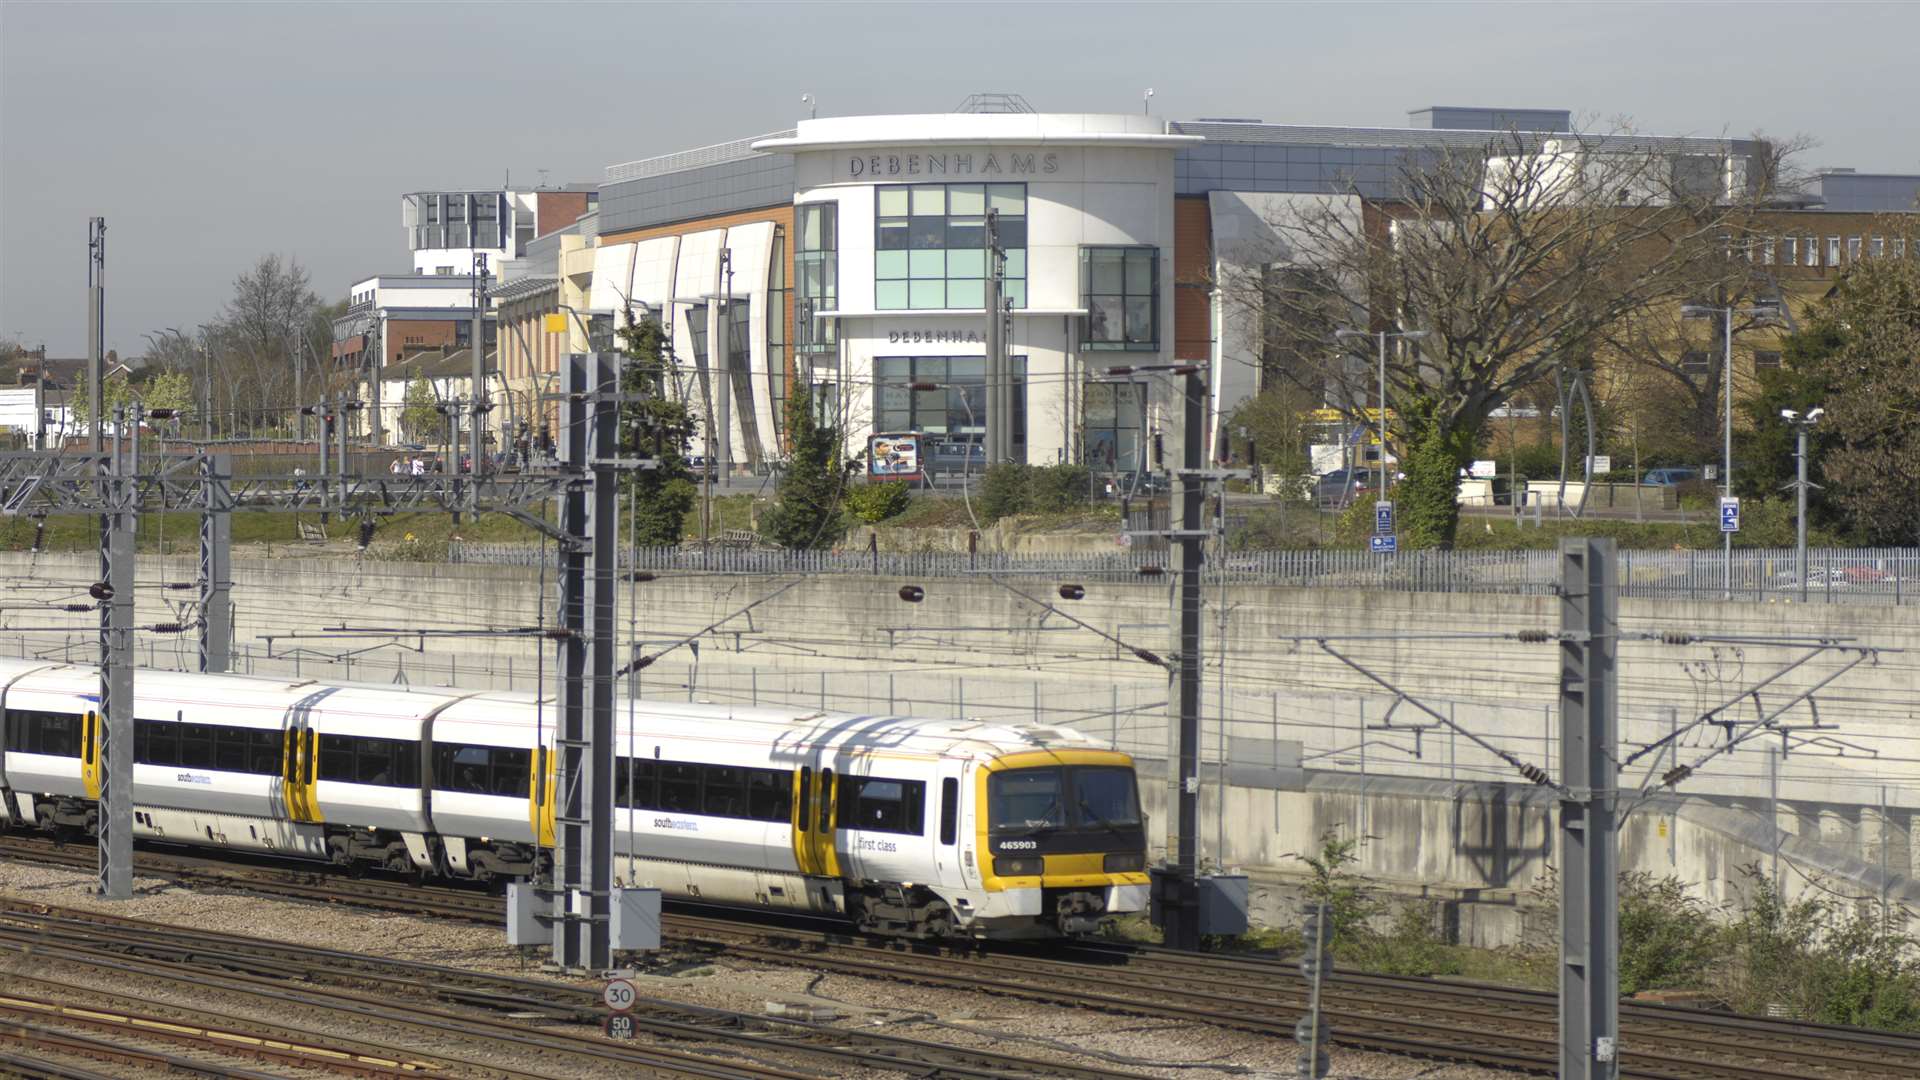 Southeastern has run the rail franchise across most of Kent since 2006